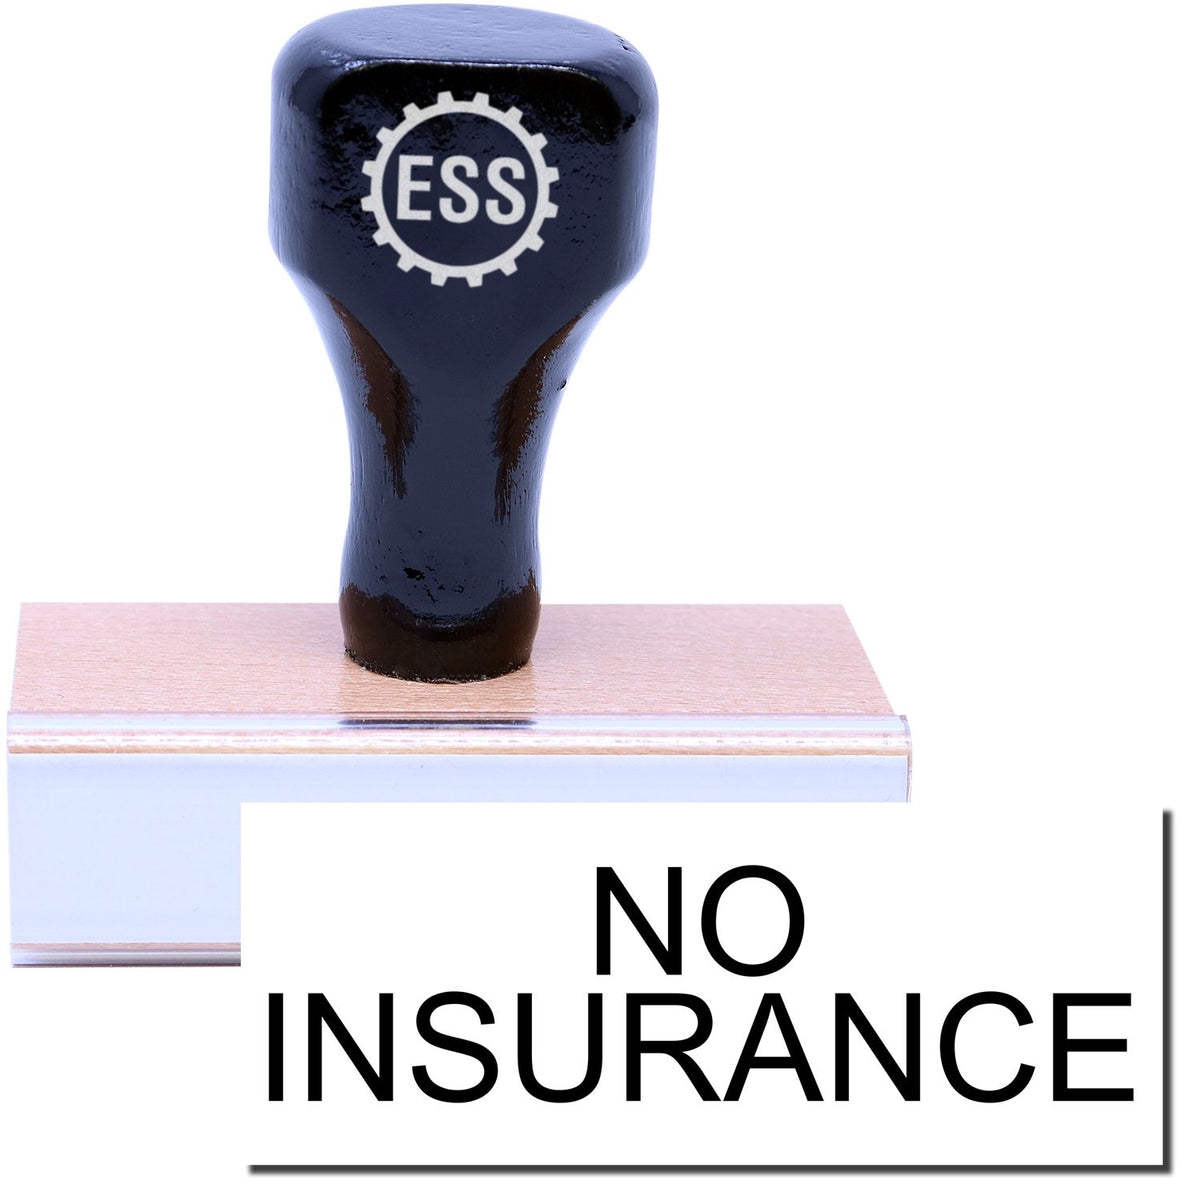 A stock office rubber stamp with a stamped image showing how the text &quot;NO INSURANCE&quot; is displayed after stamping.